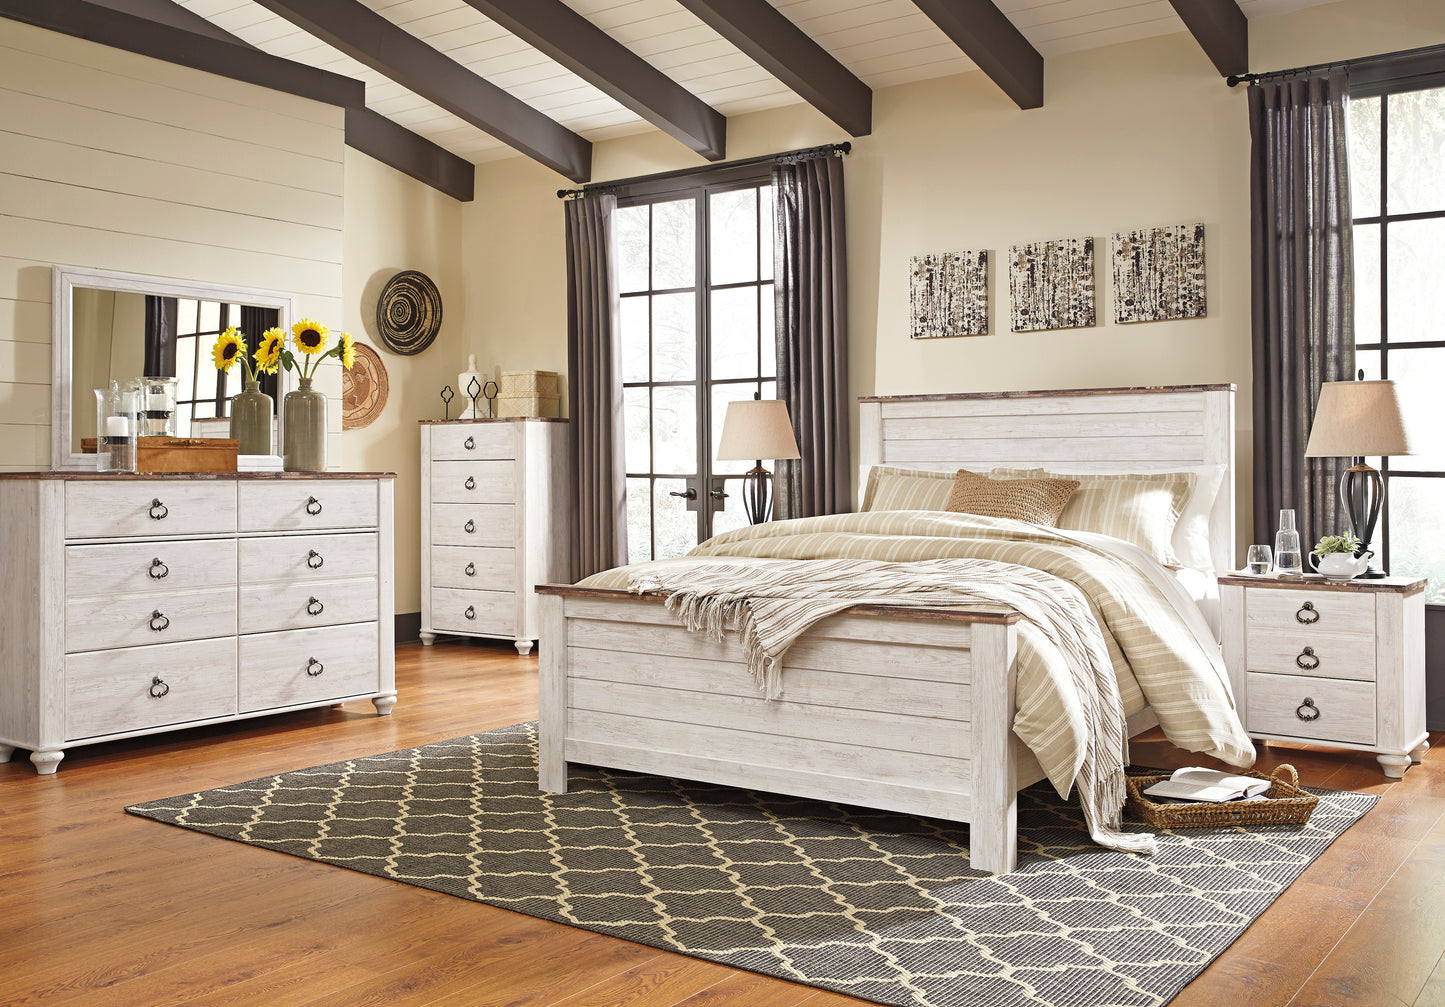 Ashley Willowton 5PC Queen Panel Bedroom Set with Two Nightstand in White